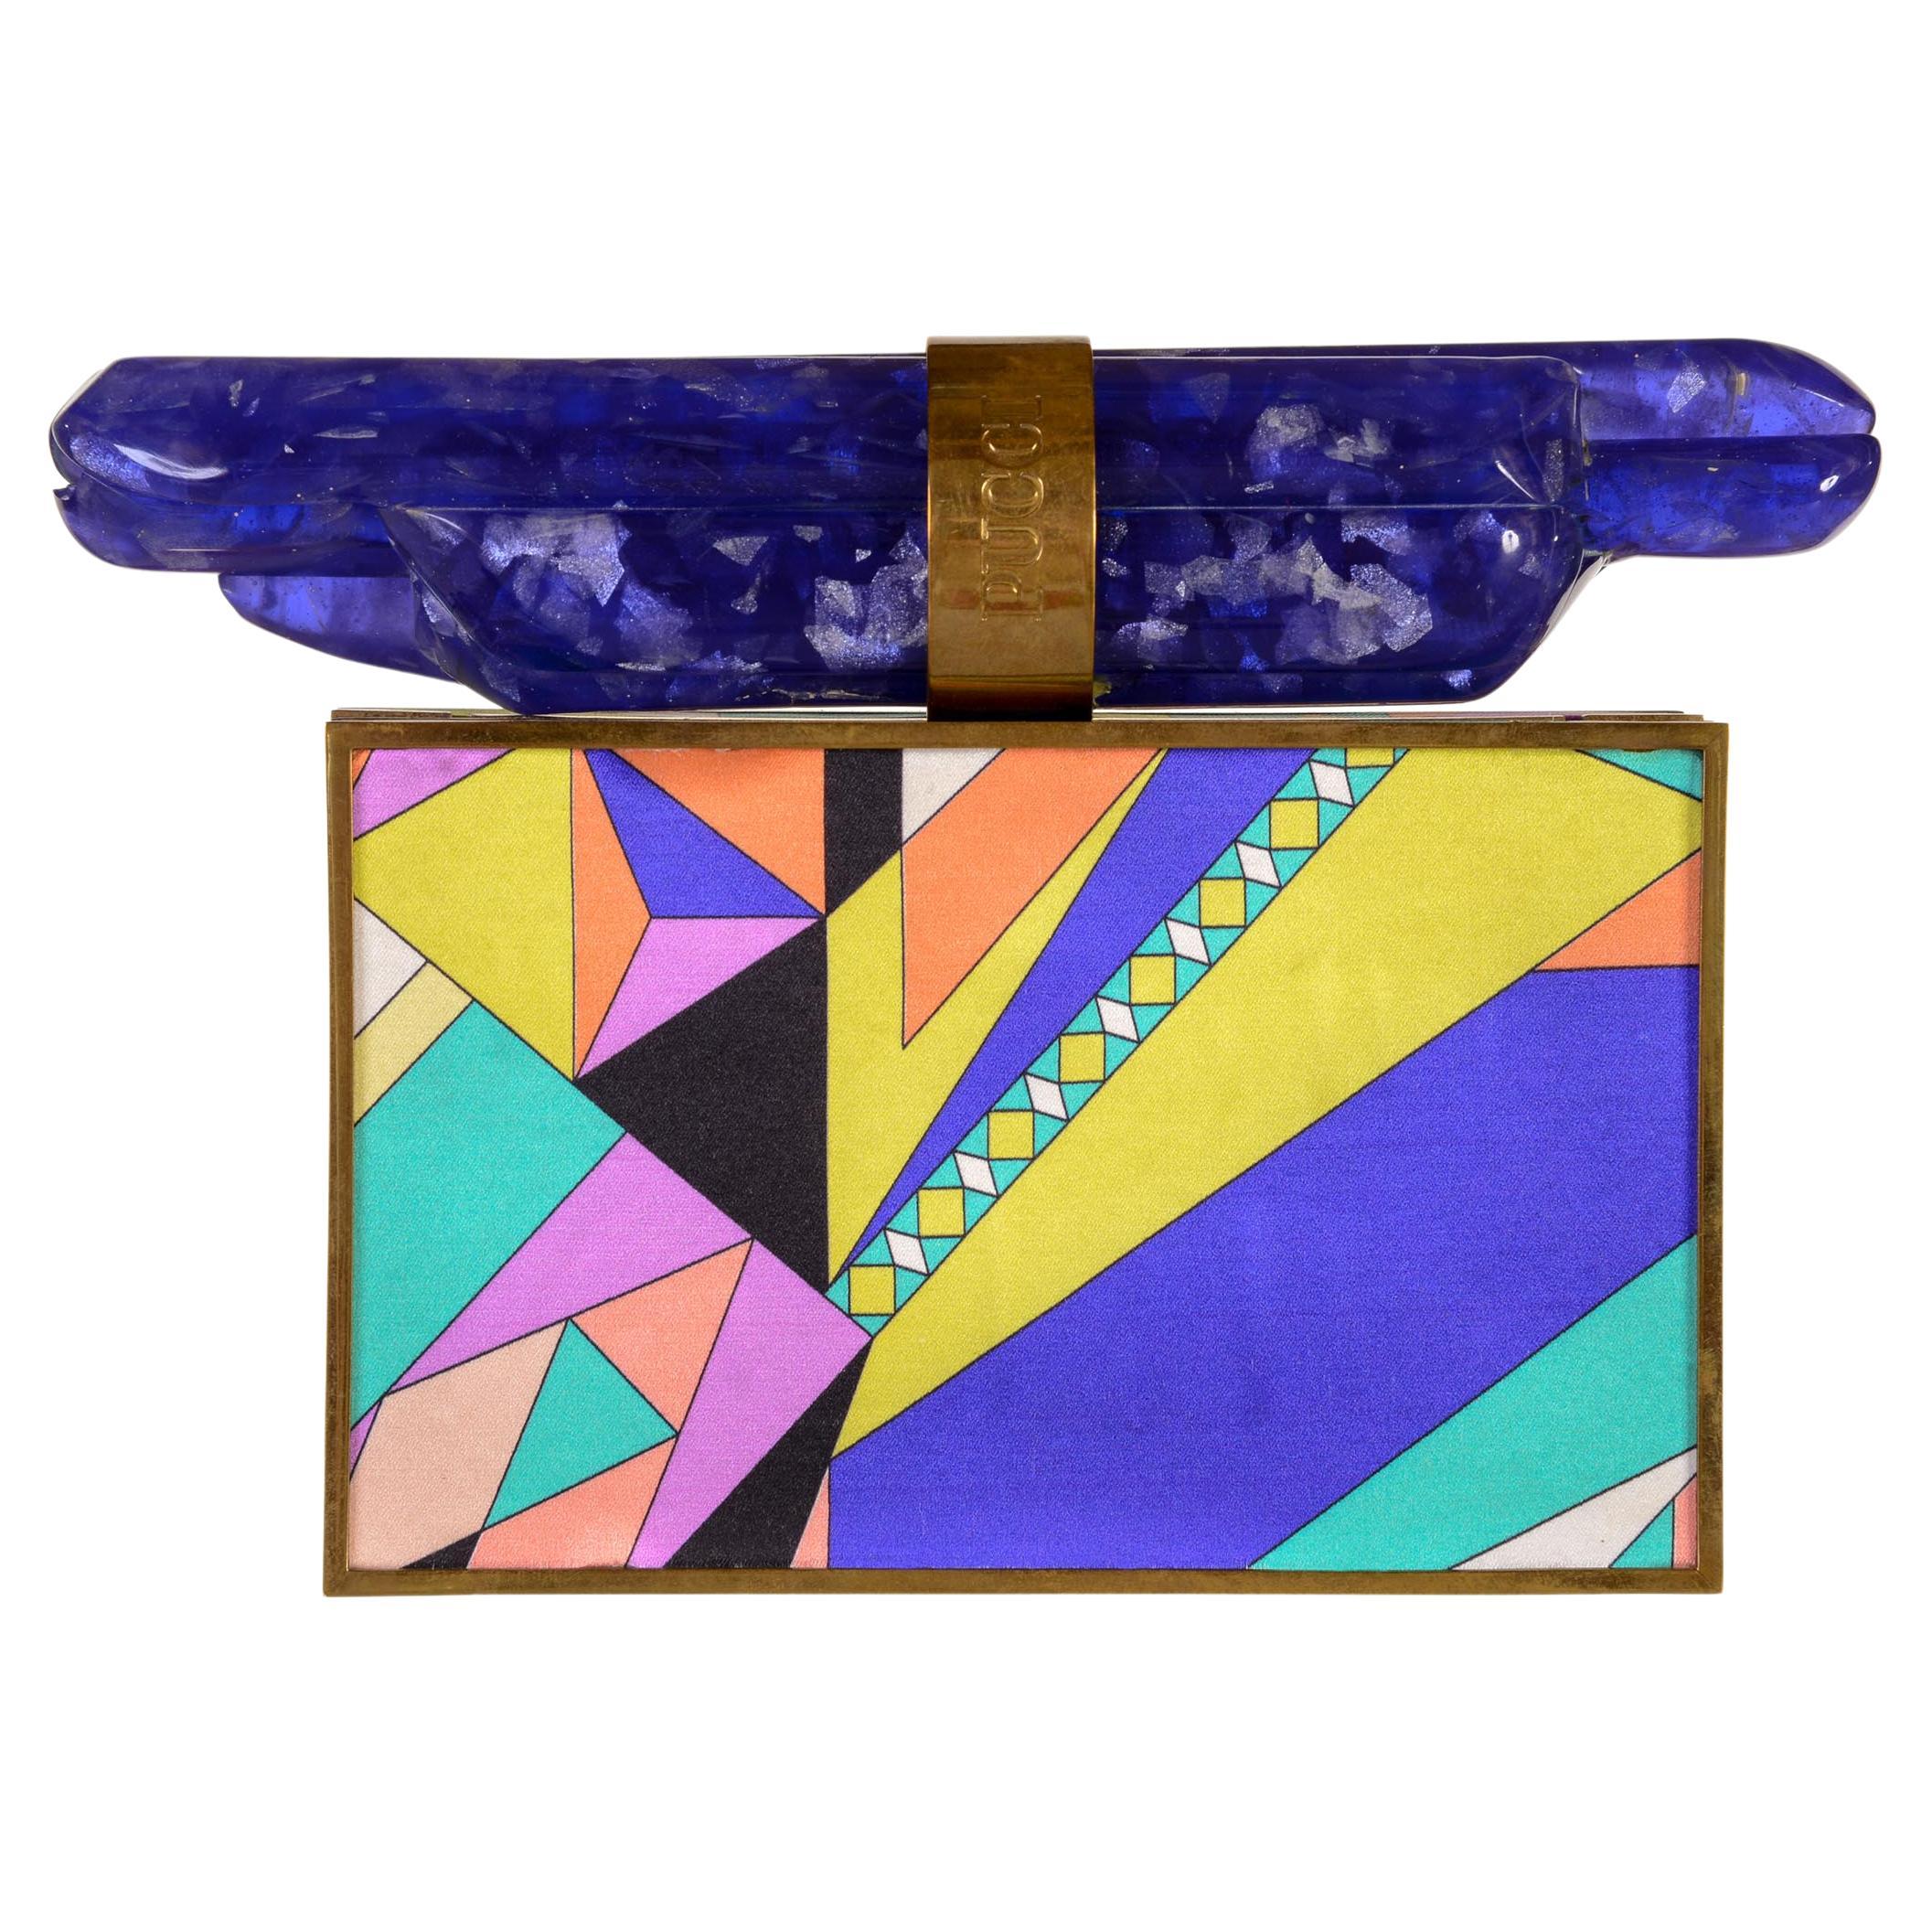 Emilio Pucci minaudière clutch  fall / winter 2008 collection
Clutch in golden metal with multicolored silk and large clasp in lapis lazuli  lucite with removable shoulder chain.
Measures:
width cm. 16
height cm. 10
depth cm. 3
weight gr. 547
Very